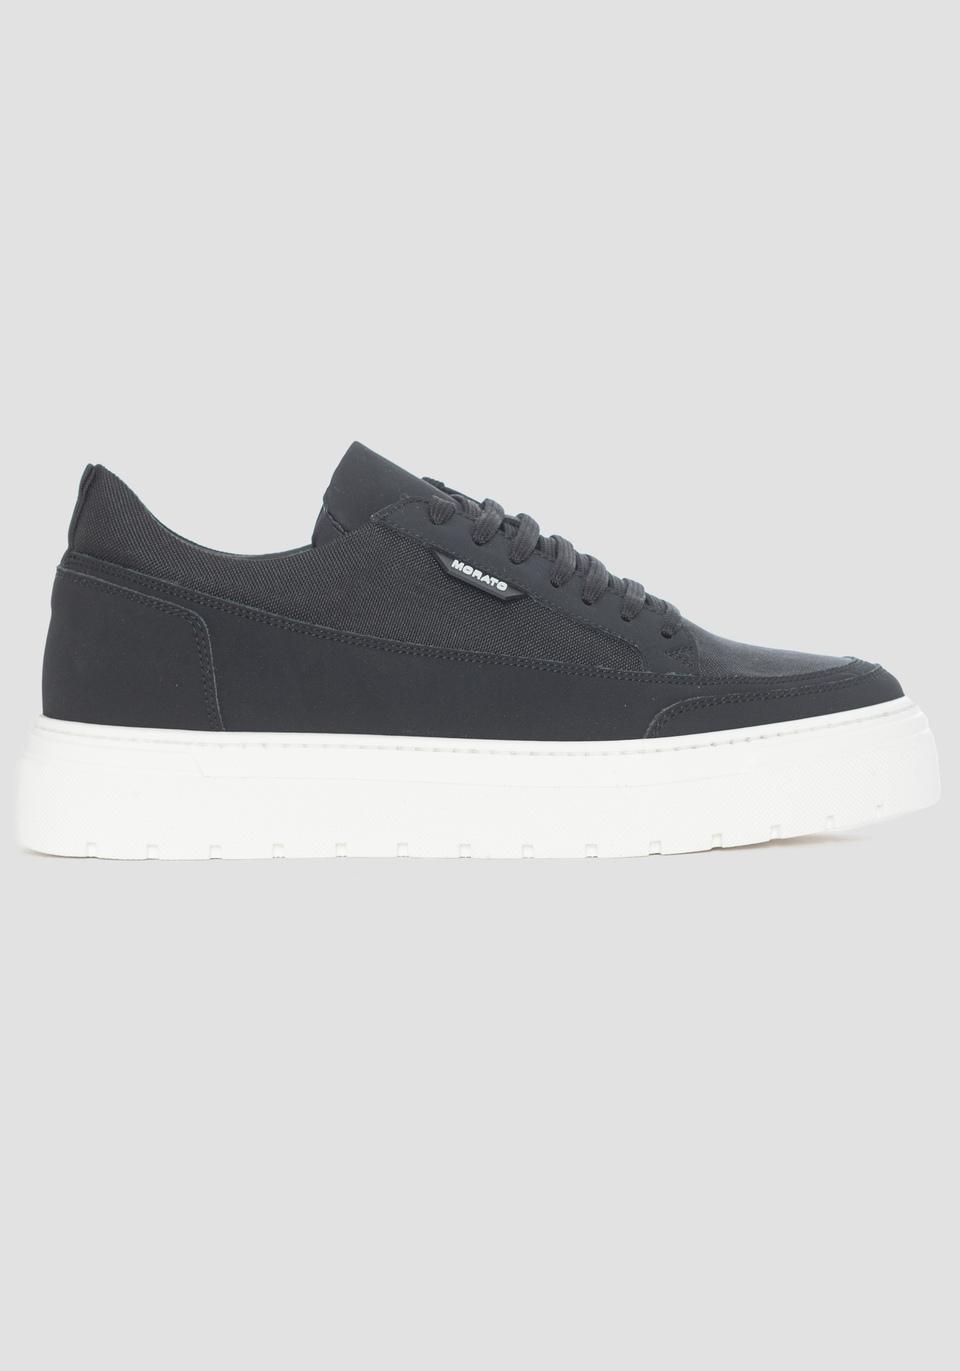 “FLINT” SNEAKER IN RECYCLED FABRIC AND NUBUCK - Antony Morato Online Shop